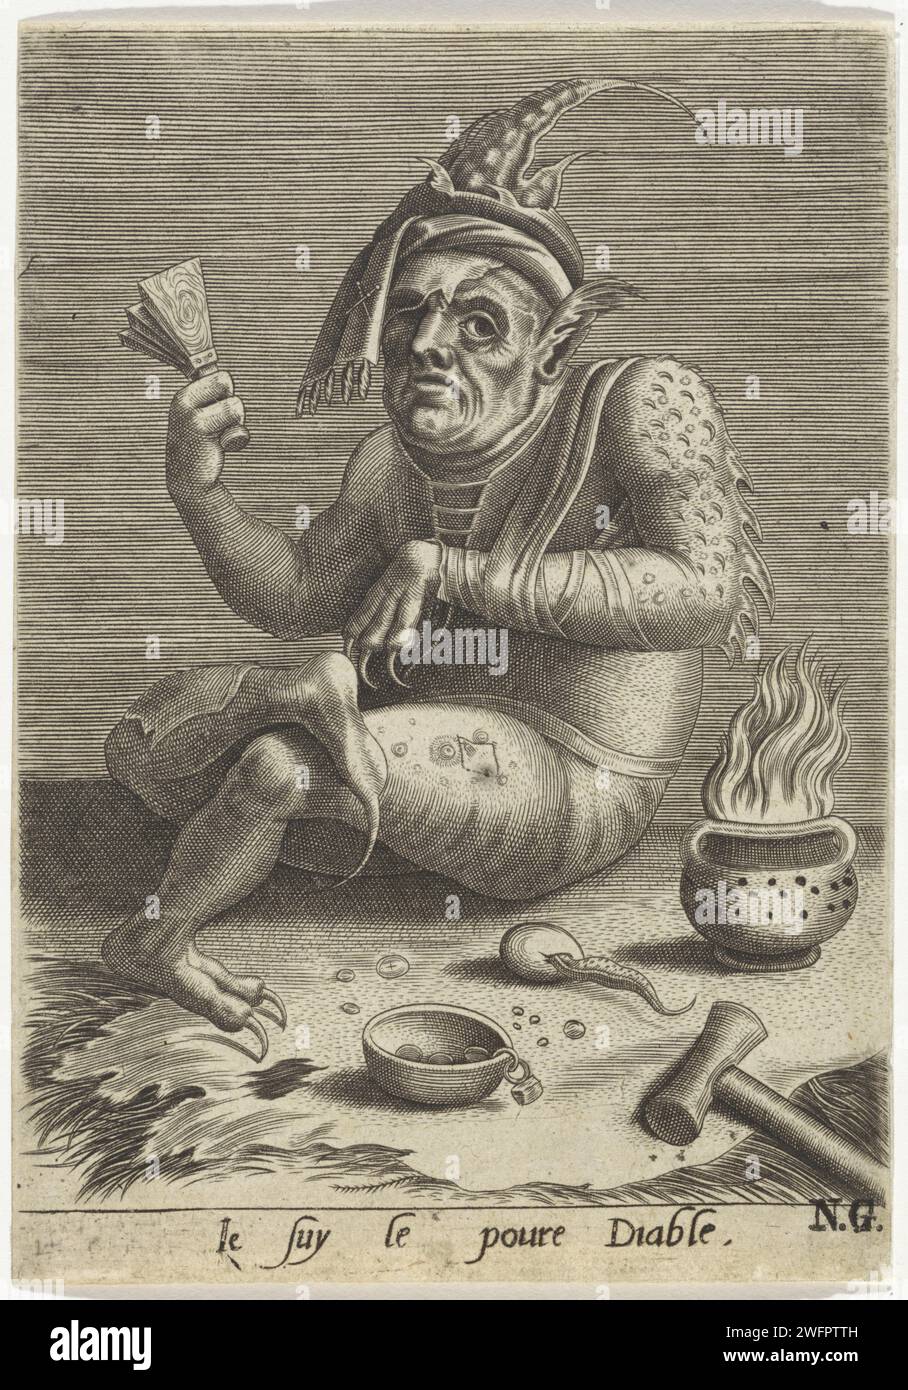 Leprosy Macker in the form of the Devil, Anonymous, After Jheronimus Bosch, 1474 - 1566 print The leprosy beer is depicted with claws like the devil. He has his attributes: the Klepper, begging nap with coins, pilgrim staff and the shape cloth with the pilgrim signs of Santiago de Compostella. For the figure, a viper crawls from an egg (adder brood) and next to him a burning fire test. His skin shows a scaly rash with pimples and purulent wounds. His left arm rests in a sling. print maker: Netherlandsafter design by: Den Bosch paper engraving beggar. leprosy. leper's rattle. devil(s) and demon Stock Photo